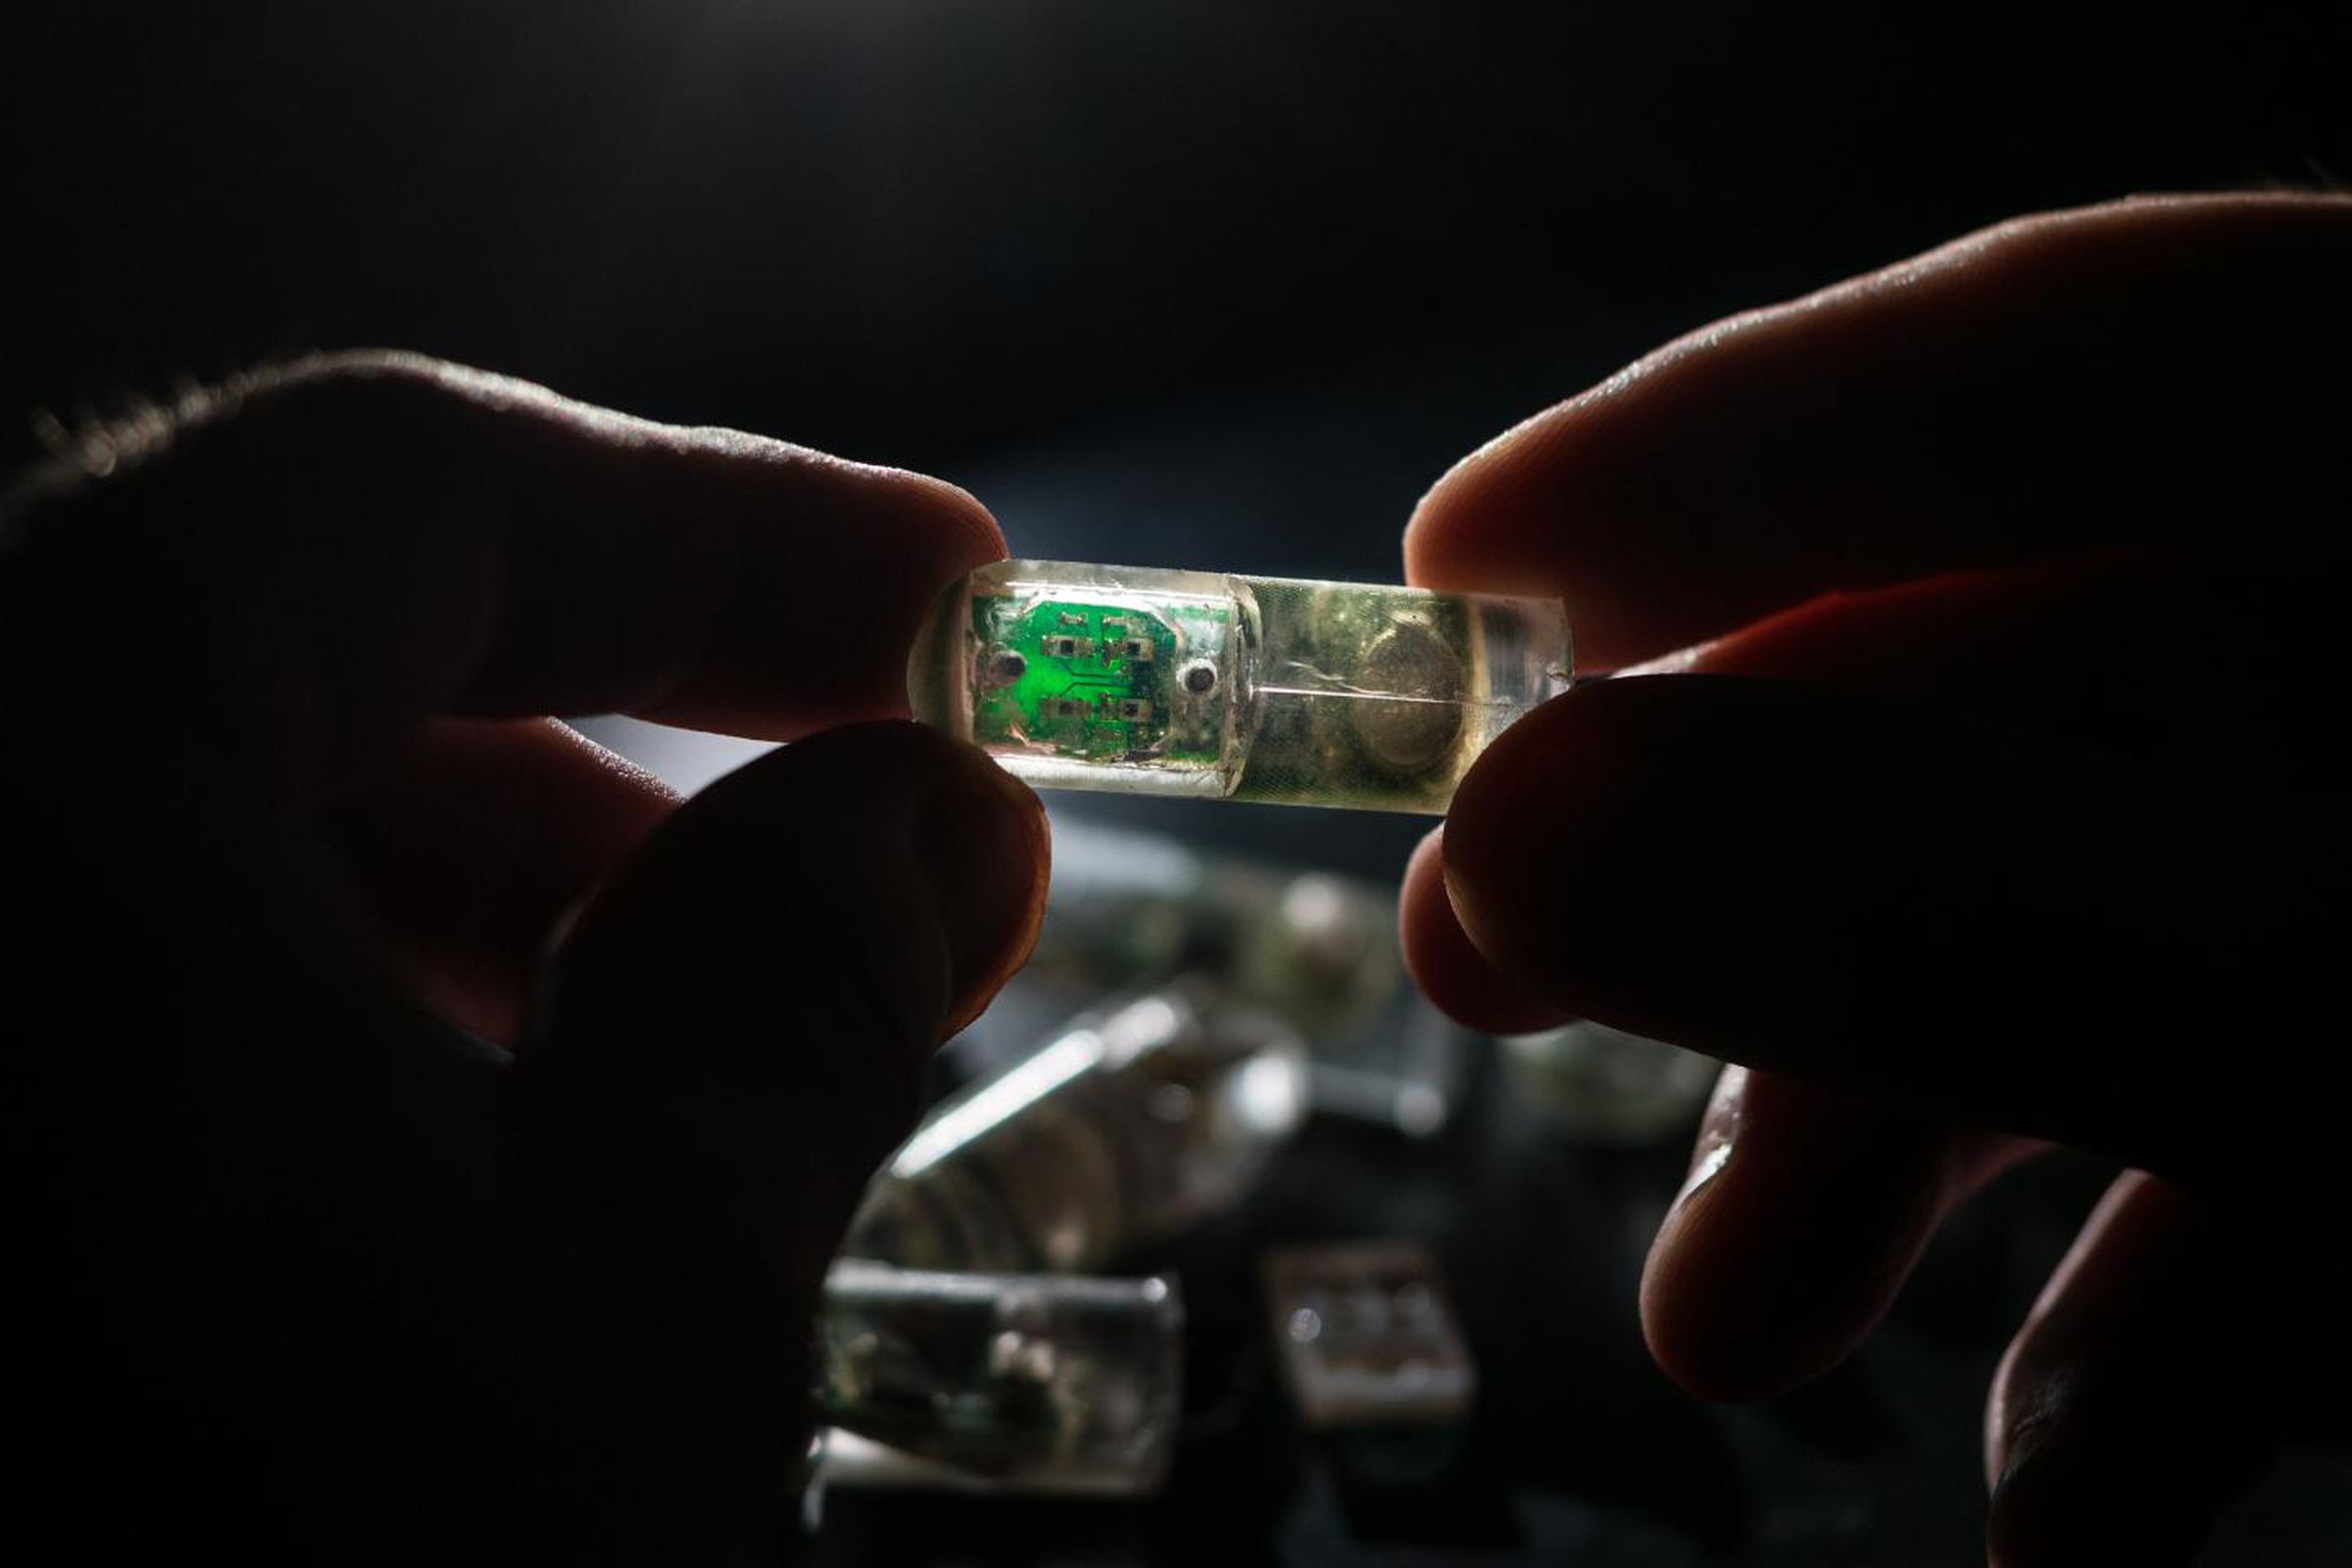 This ingestible sensor has bacteria inside that is programmed to sense blood in the gut, and then wirelessly deliver that information.